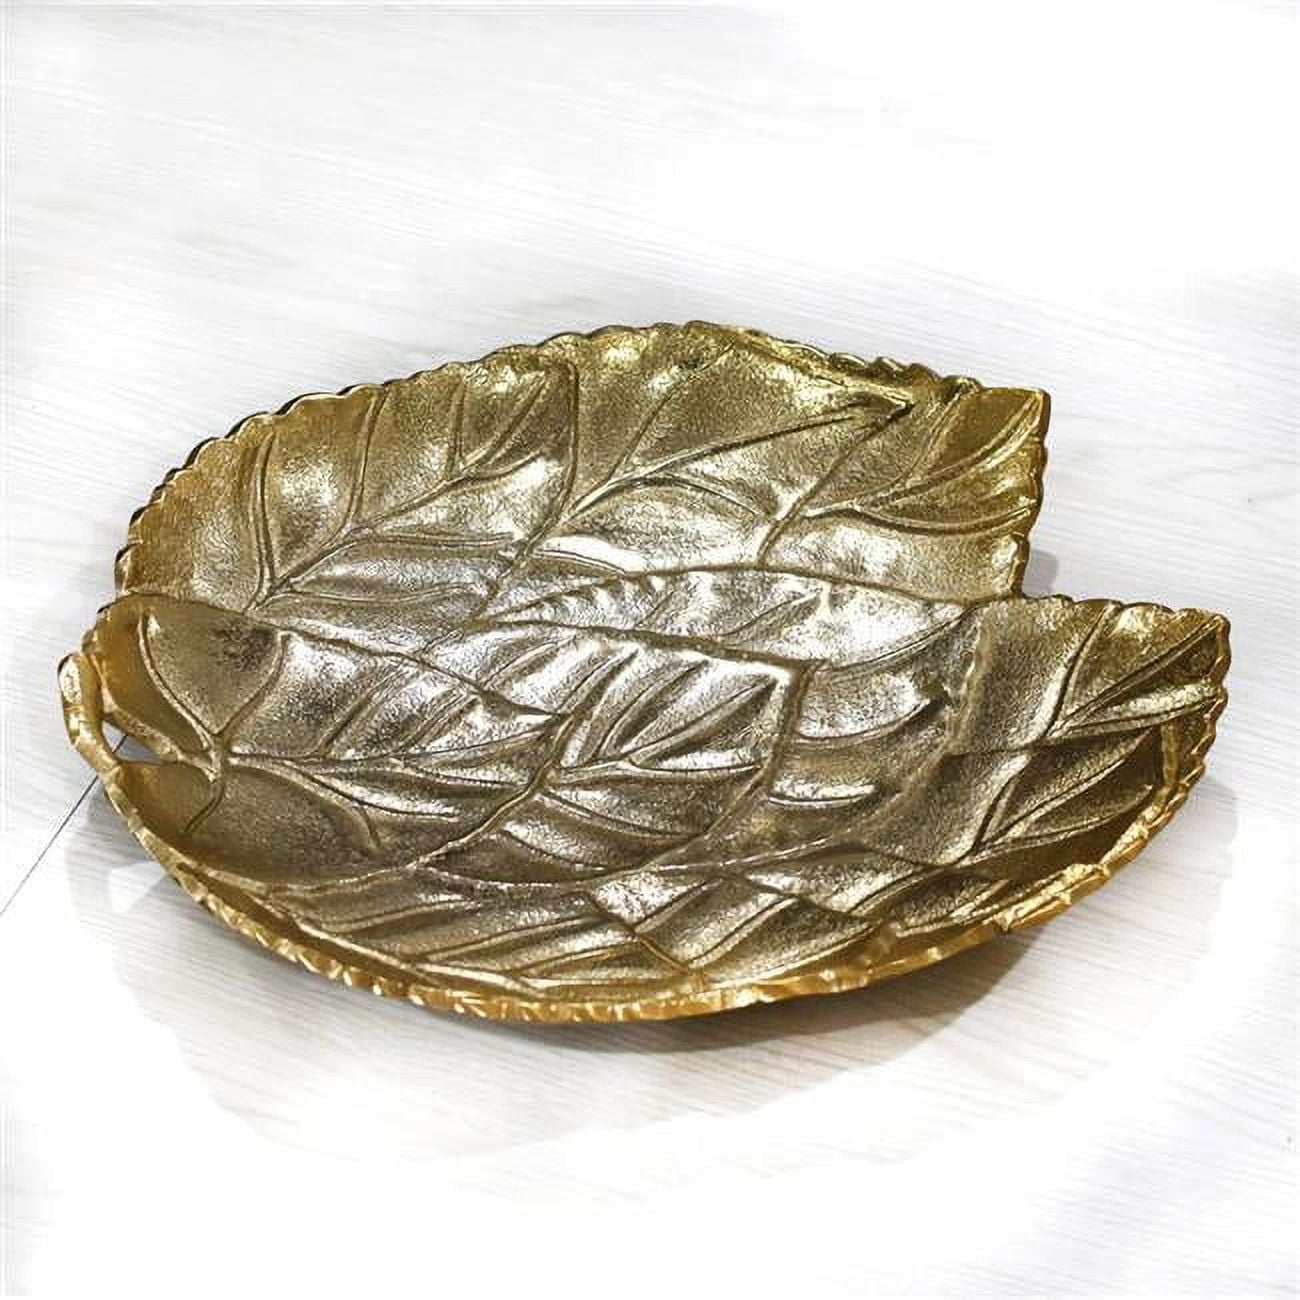 Picture of BBH Homes UBBBVK030AB2020BSC2HS 14.96 x 12.99 x 2.36 in. Handmade Gold Coated Decorative Aluminum Tray